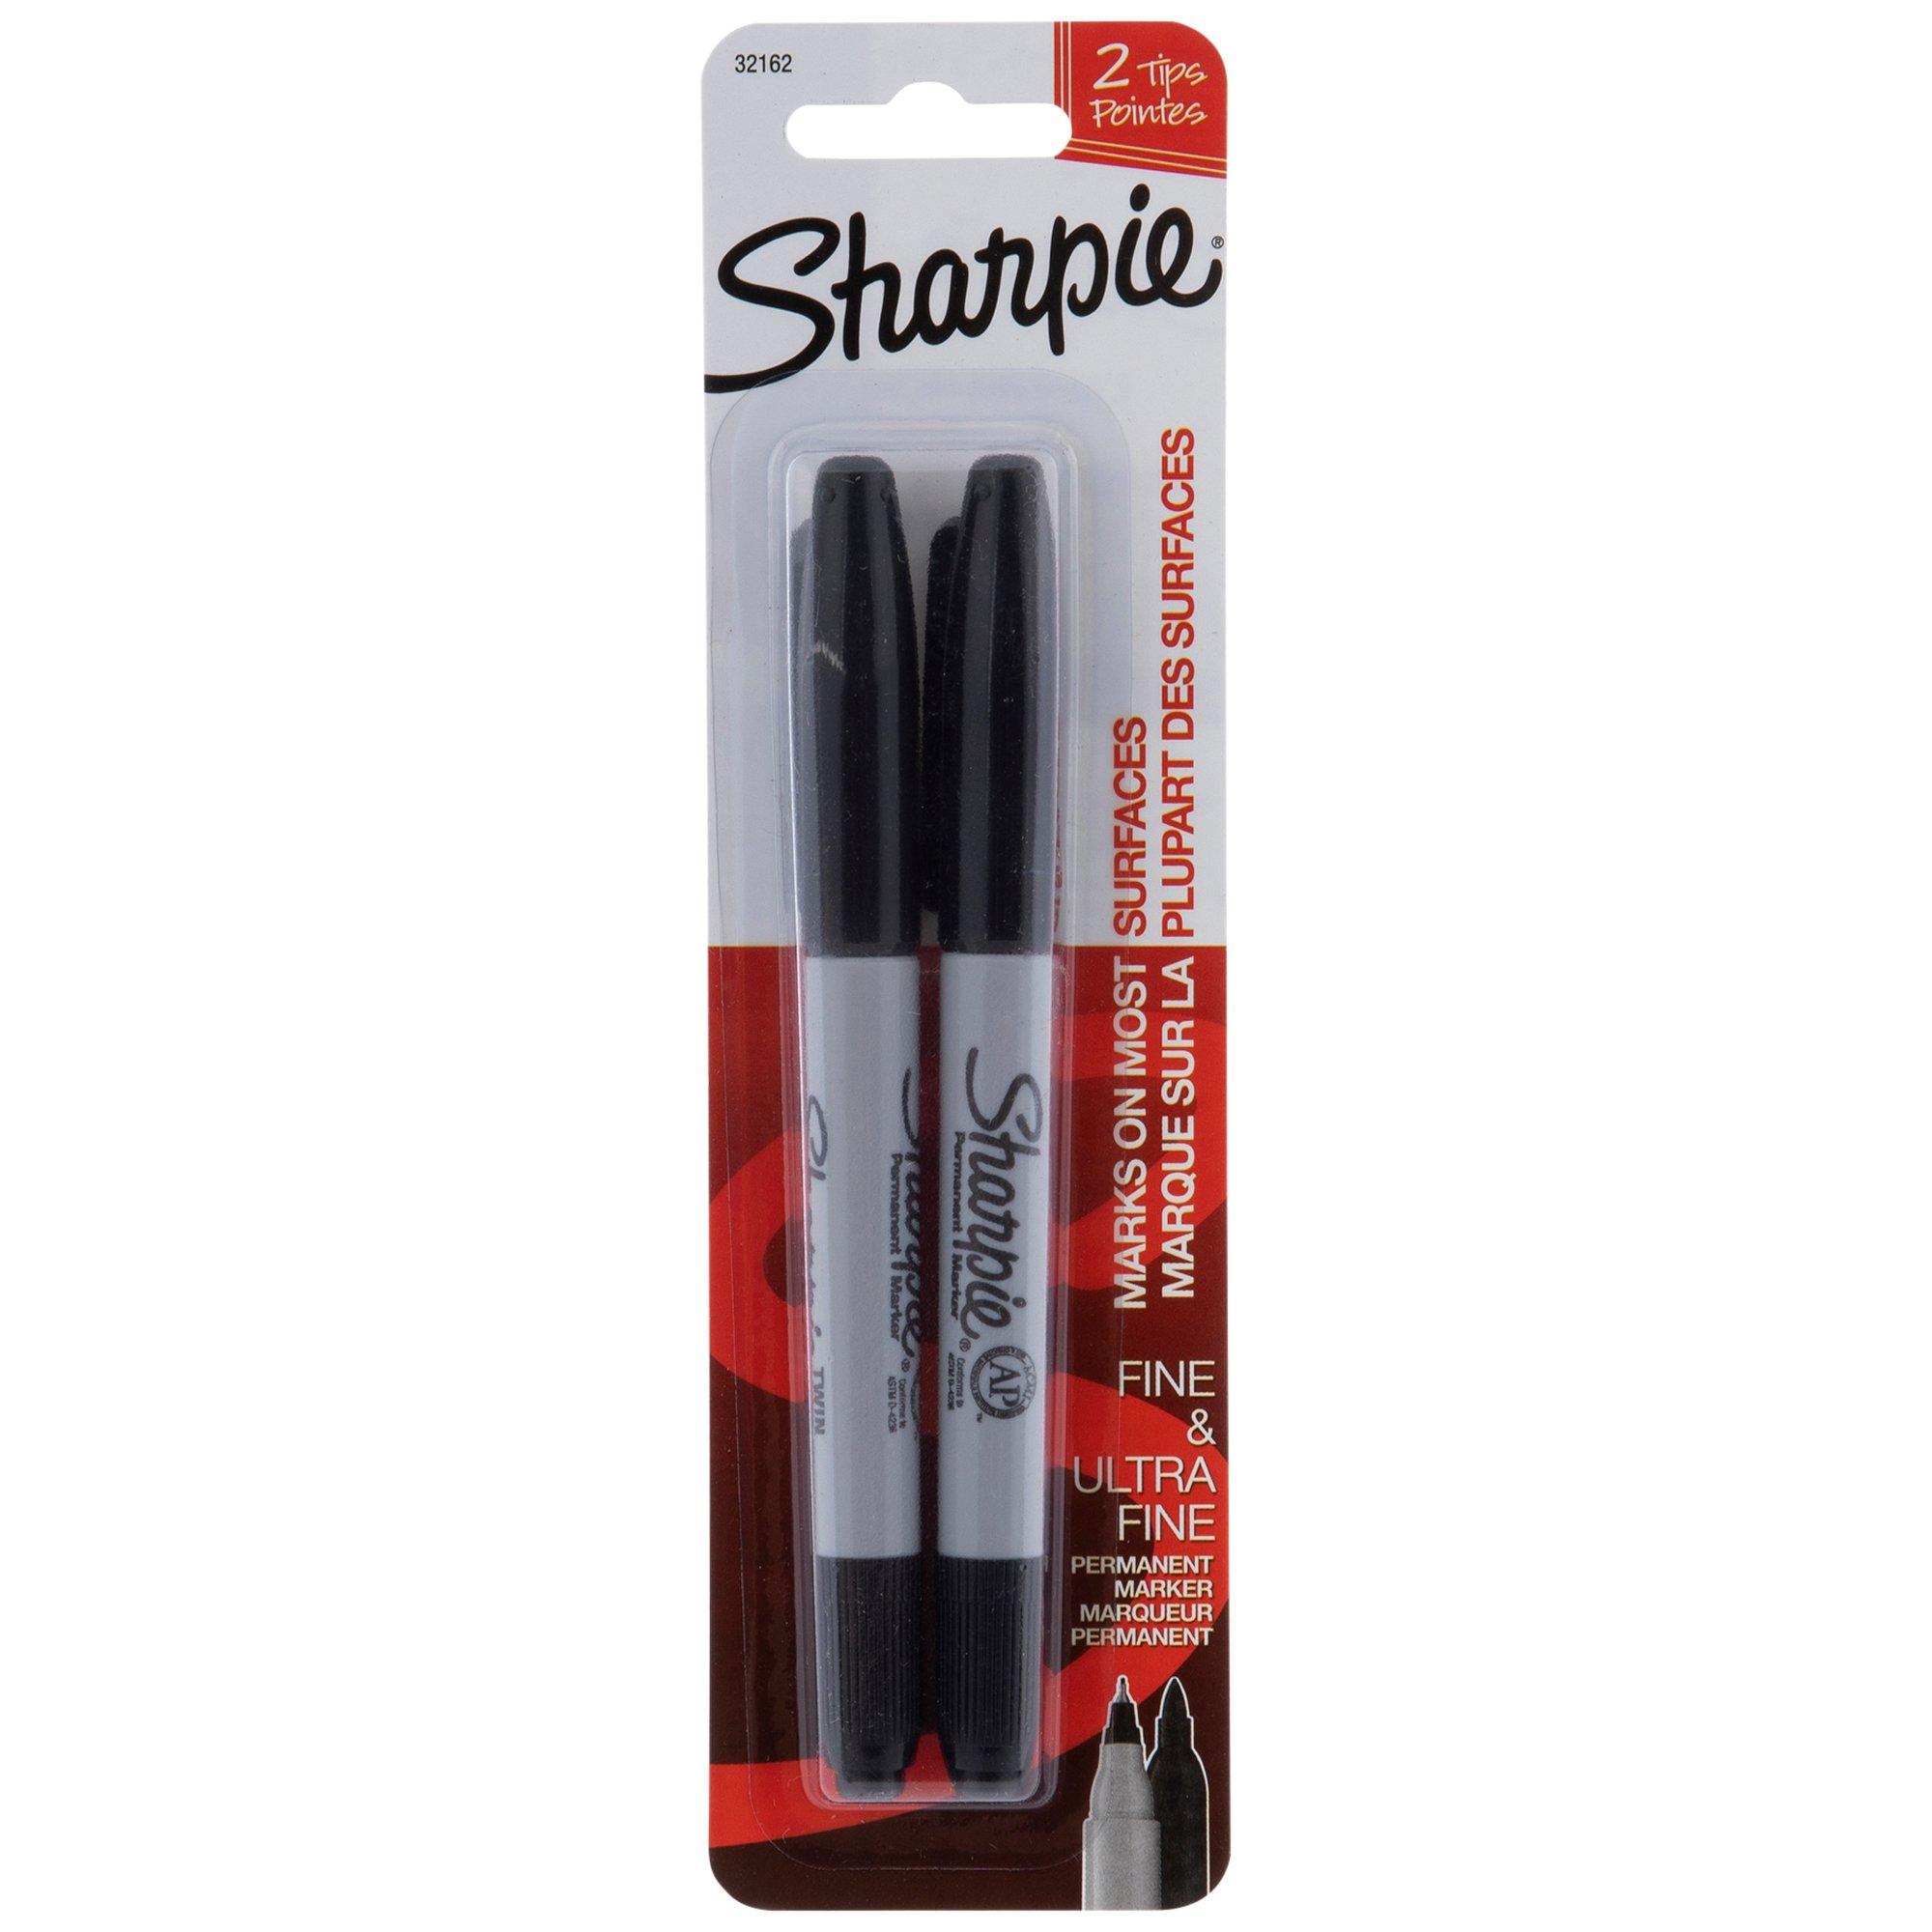 Chisel Tip Sharpie Markers - 4 Piece Set, Hobby Lobby